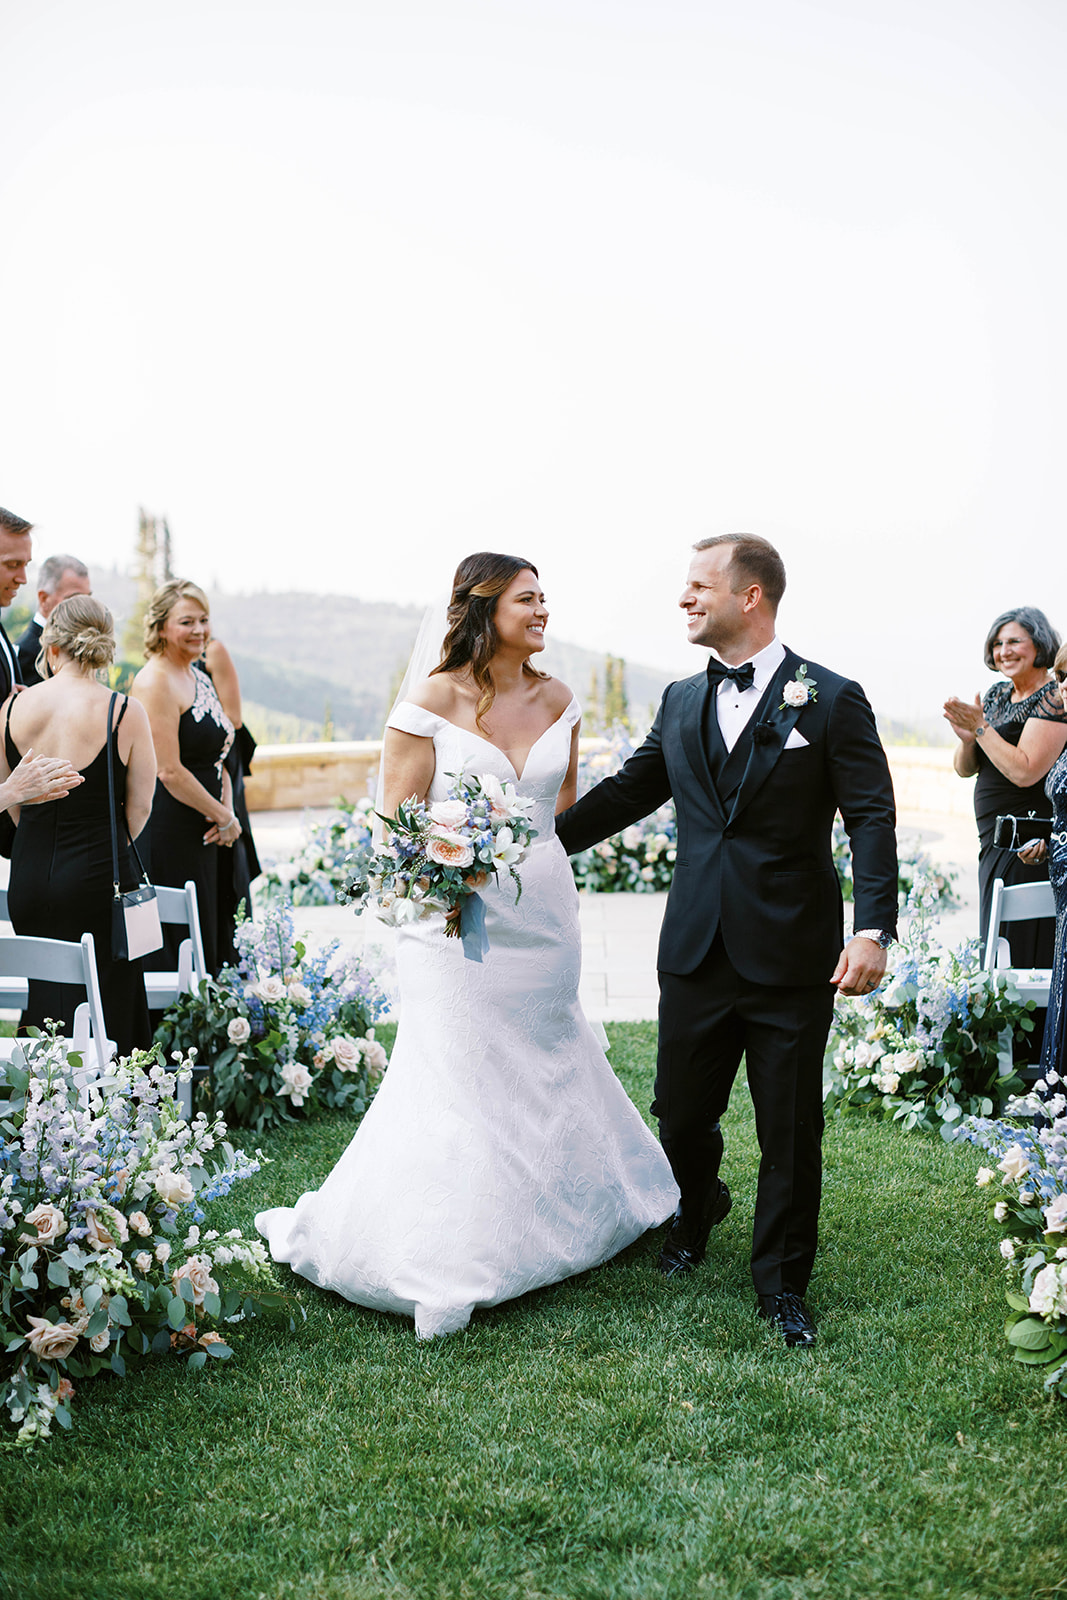 a bride and groom smile at their loved ones after their garden theme wedding ceremony at montage deer valley resort in park city utah. photo by megan robinson photography